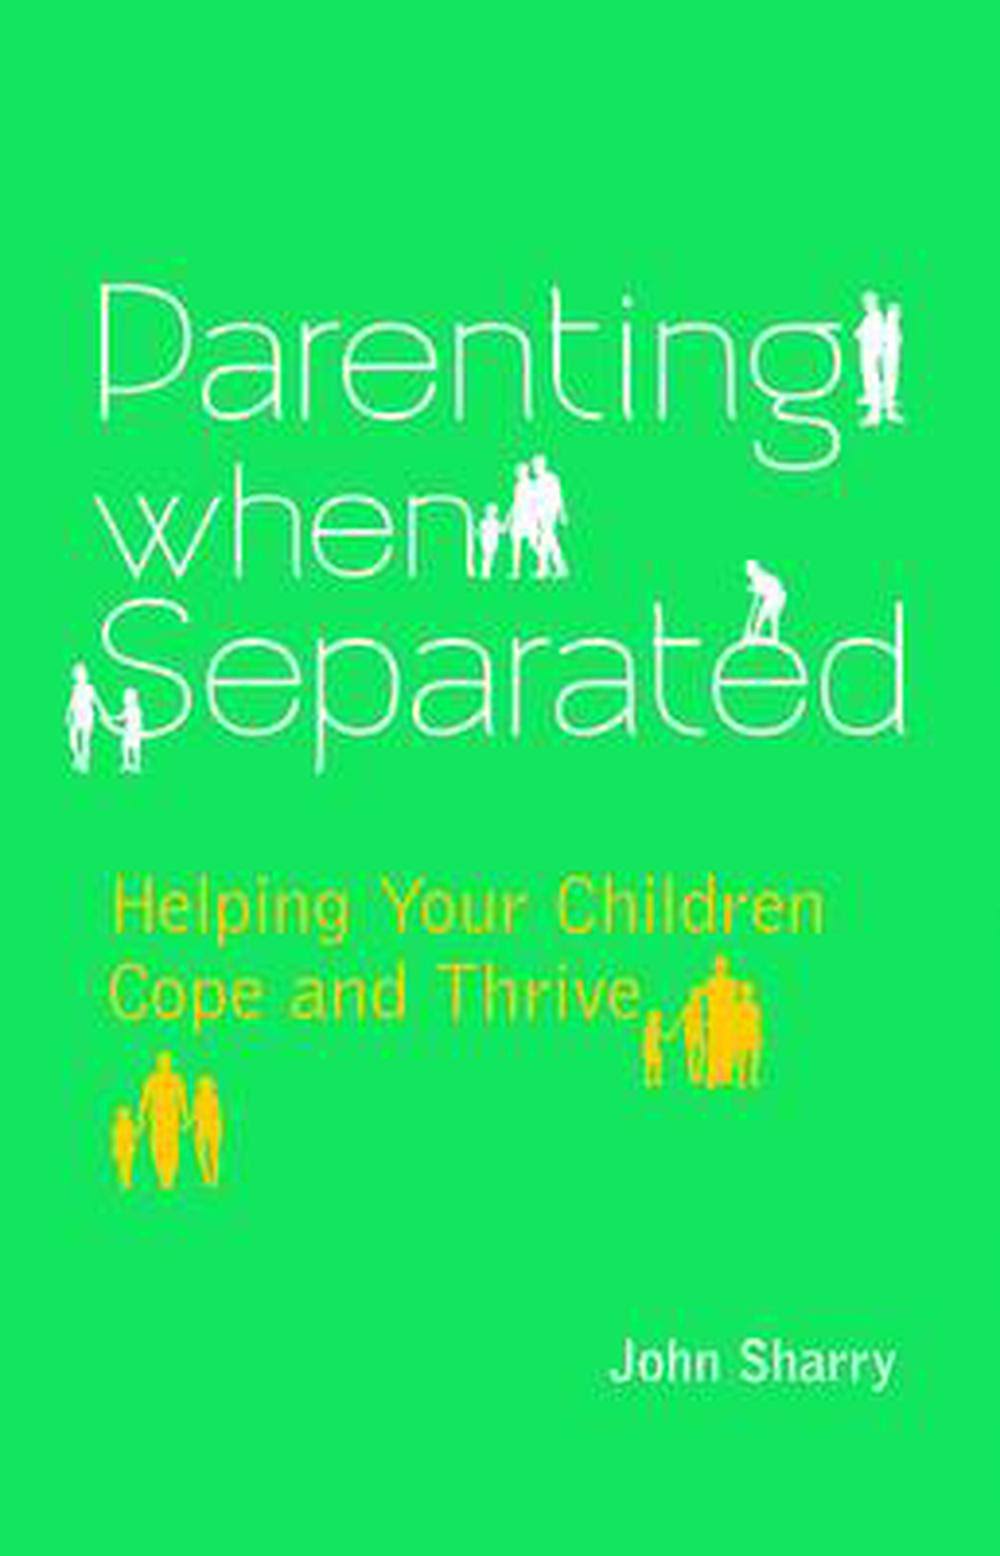 Parenting When Separated - John Sharry